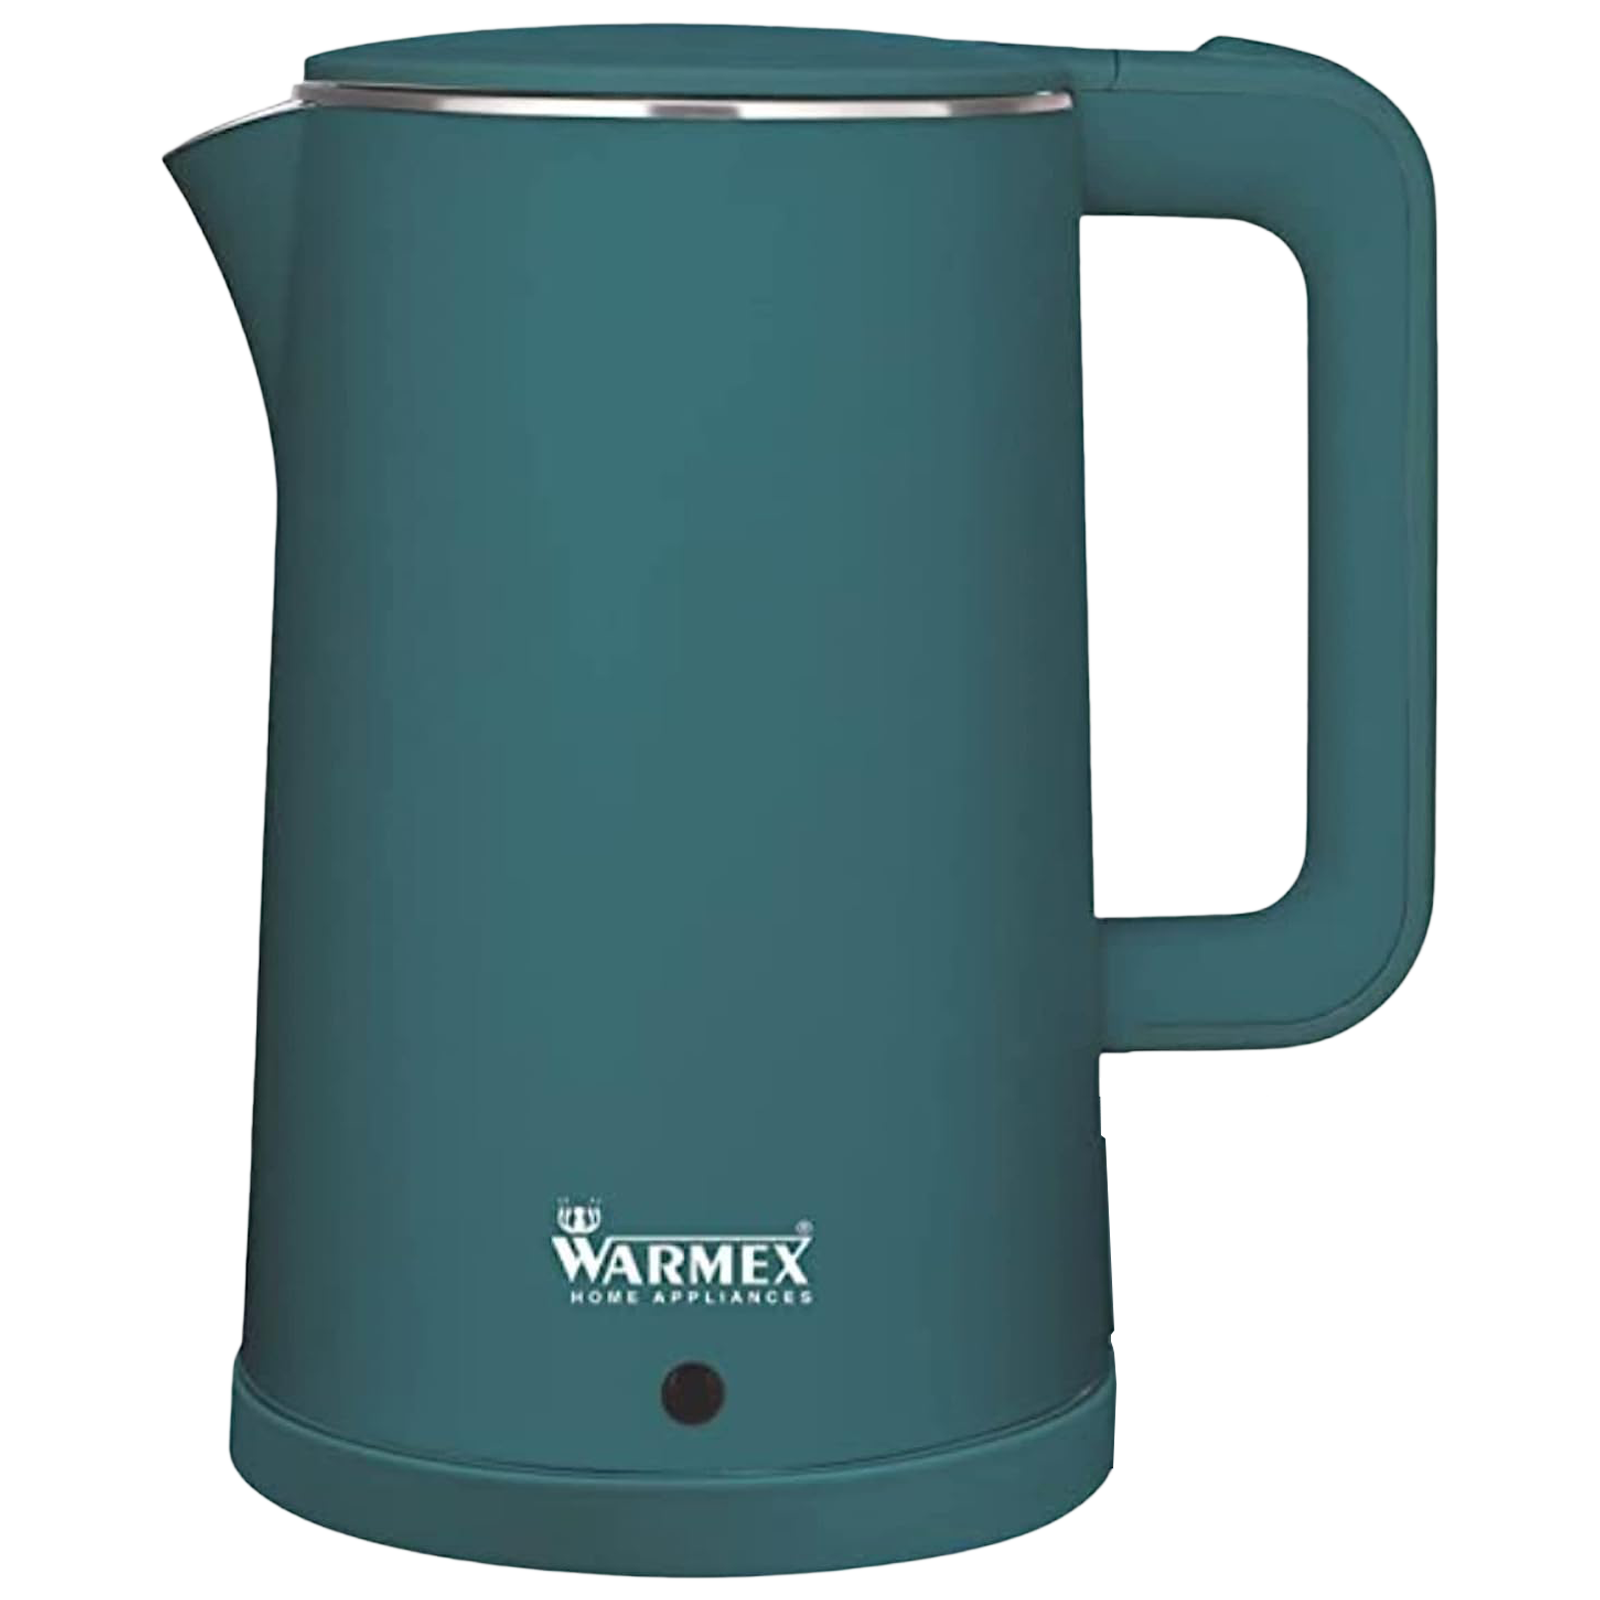 Warmex 1.8 Litres 1500 Watts Electric Kettle (Detachable Base, 103 Degree Celsius Heating in 5min, KW80, Green)